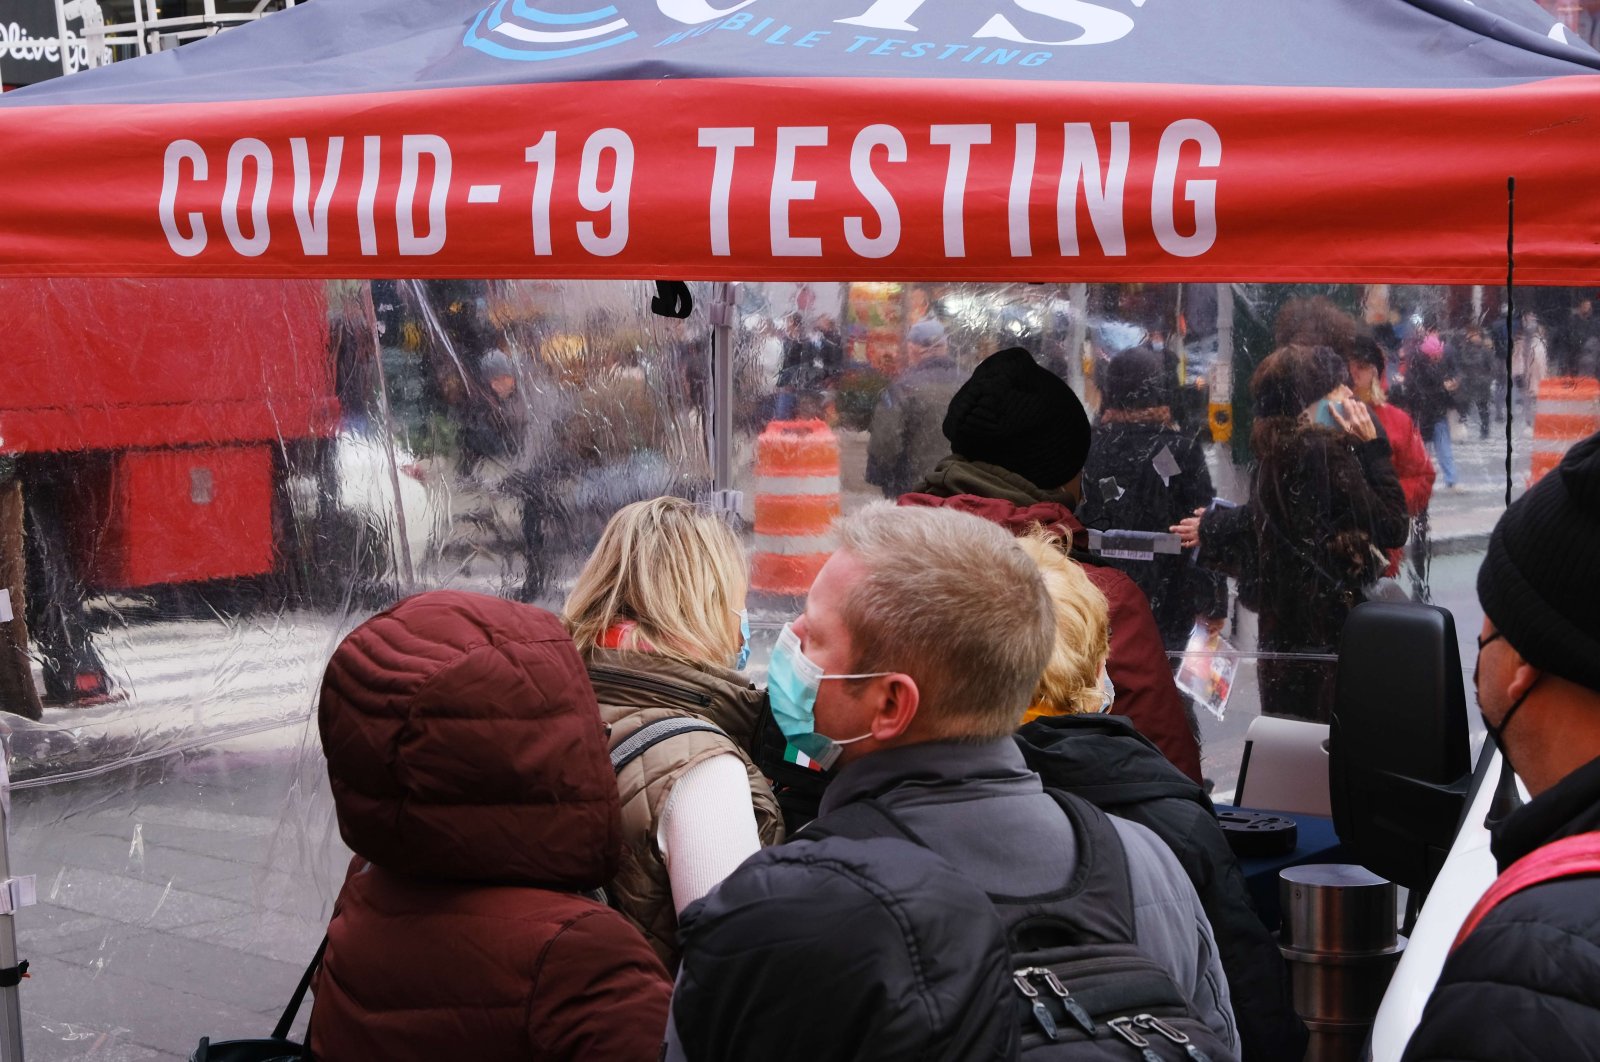 People wait in line to get tested for COVID-19 at a testing facility in Times Square in New York City, New York, U.S., Dec. 9, 2021. (AFP Photo)